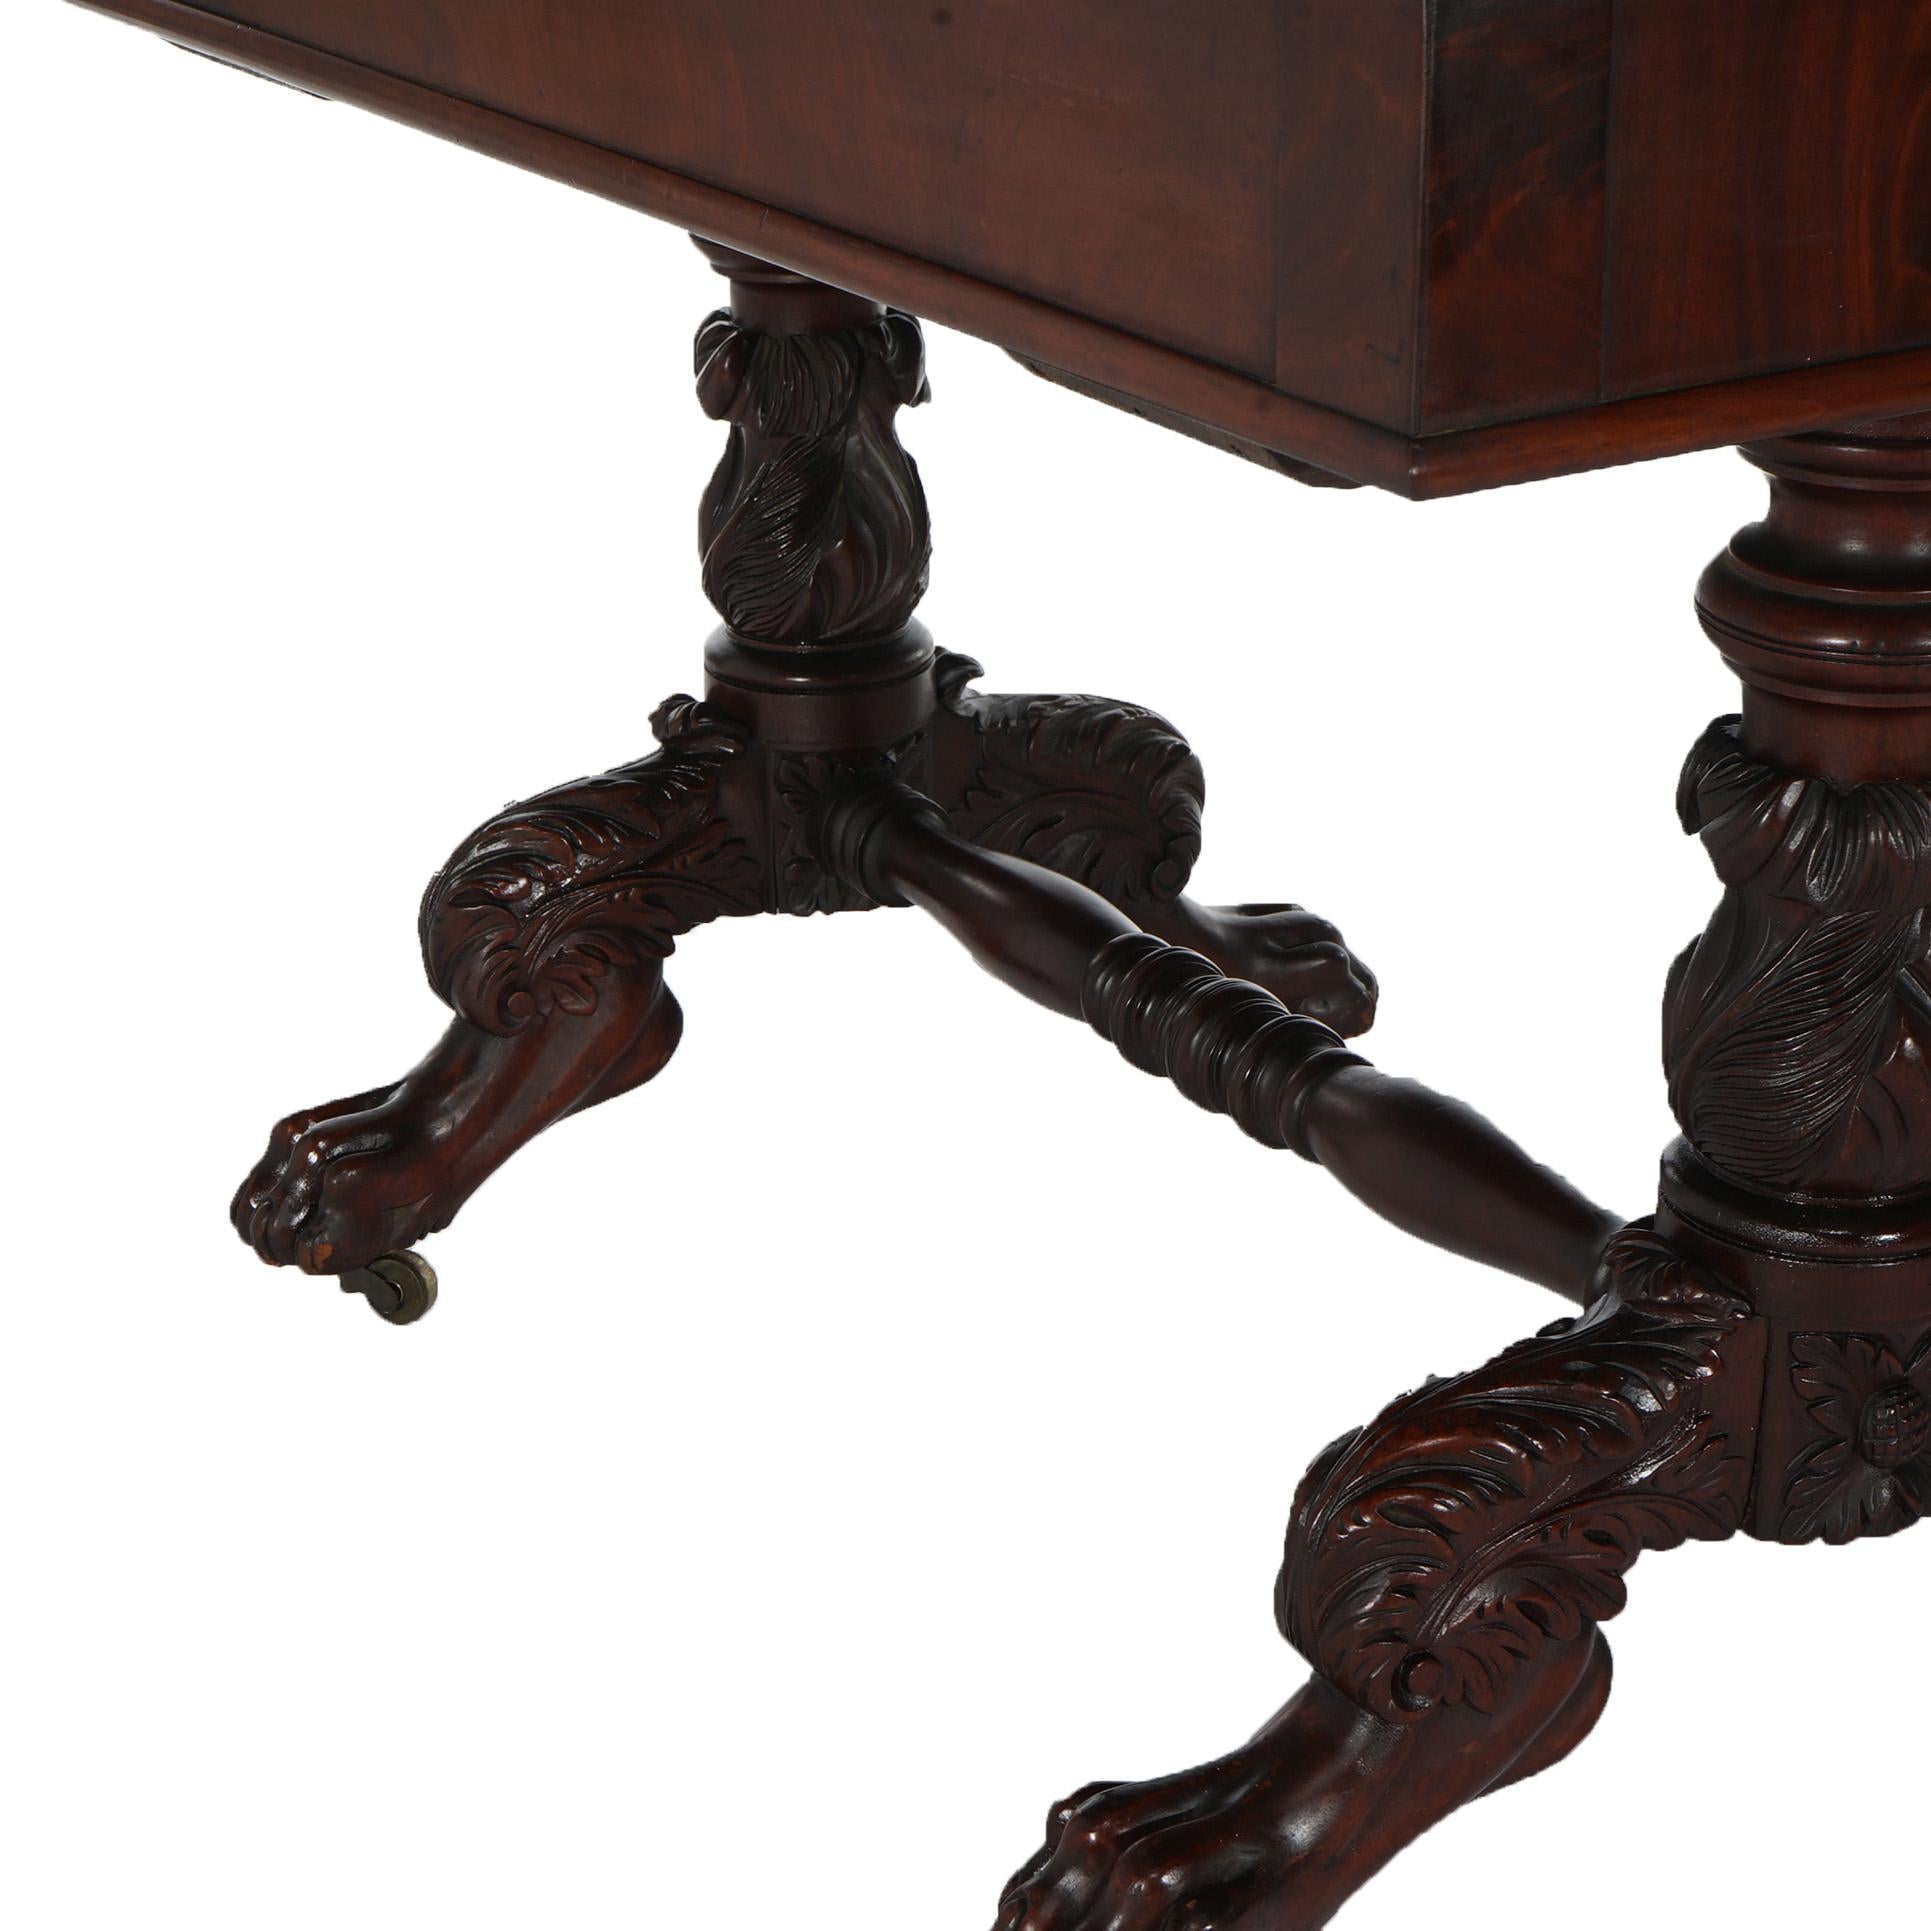 Antique American Empire Flame Mahogany Sofa Table, Carved Acanthus & Paws, C1840 For Sale 10